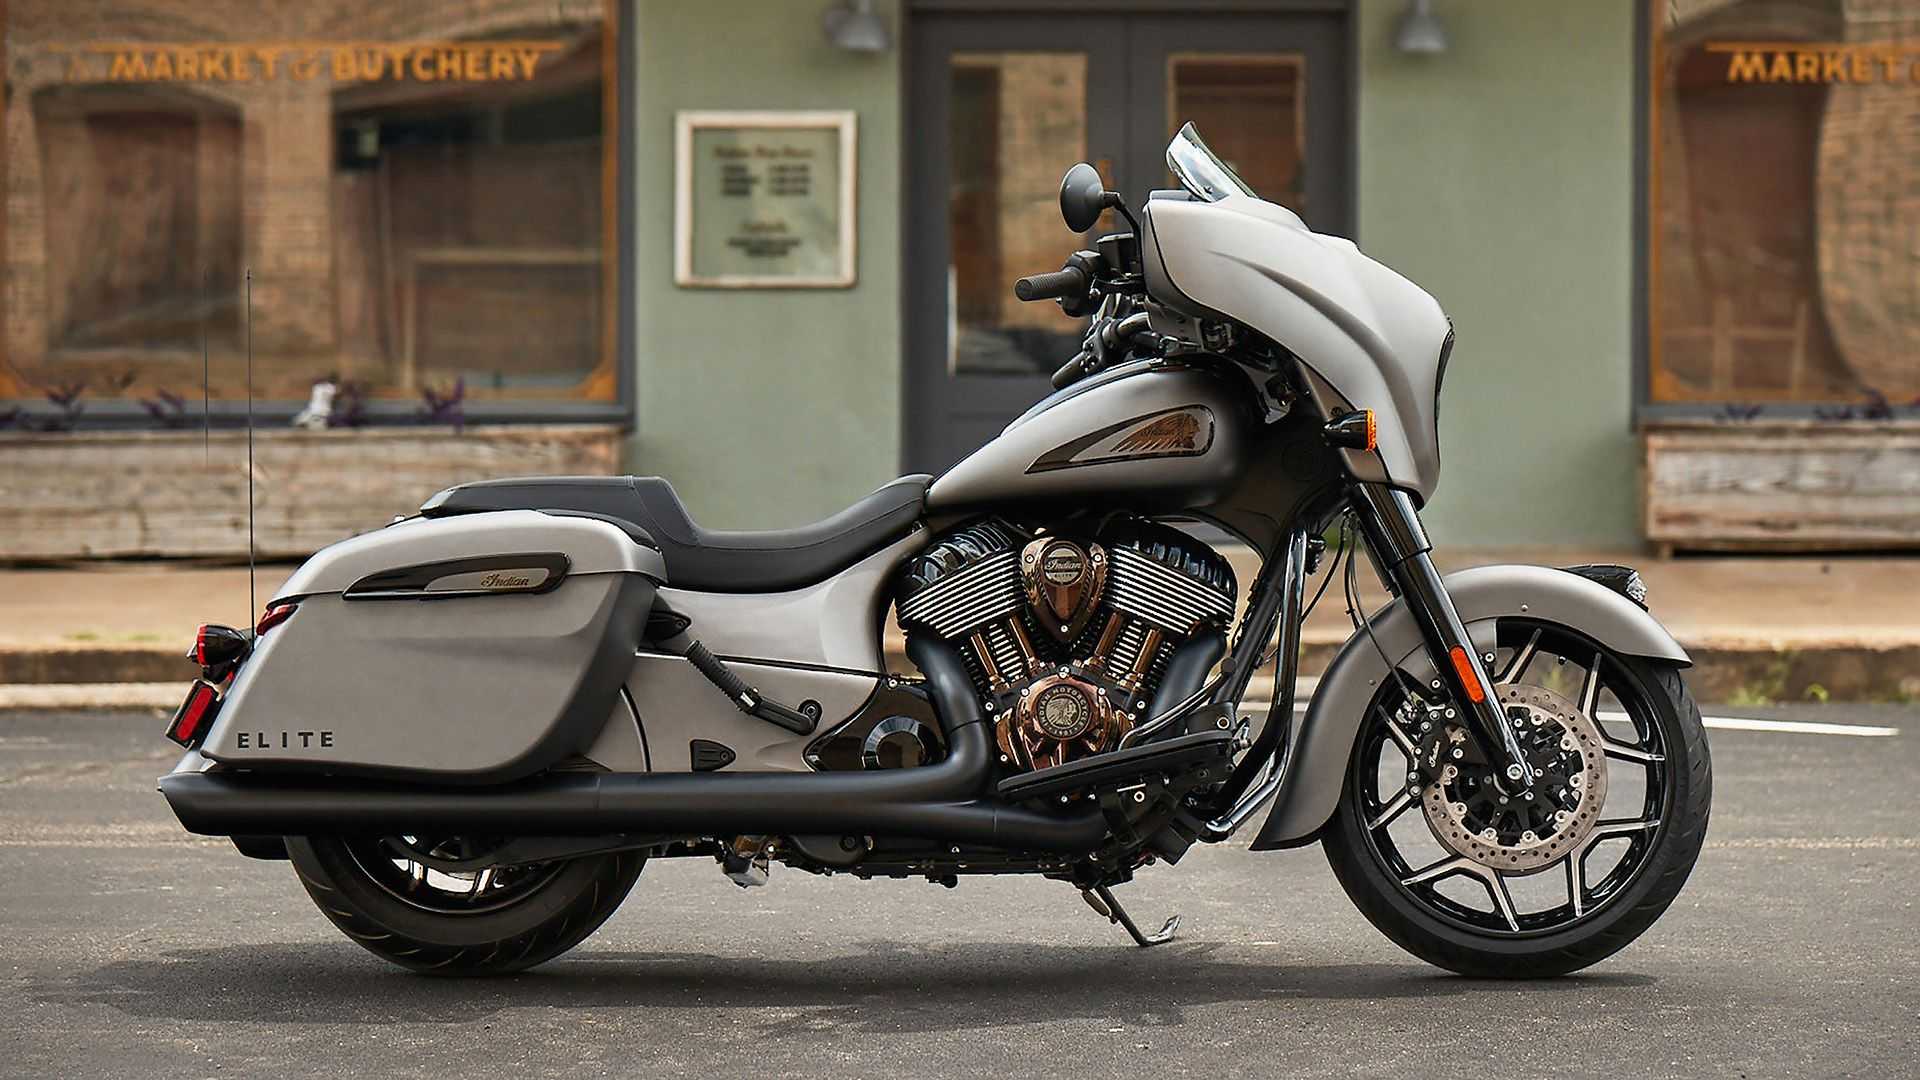 Indian's chieftain elite. Photo courtesy of Indian Motorcycles.